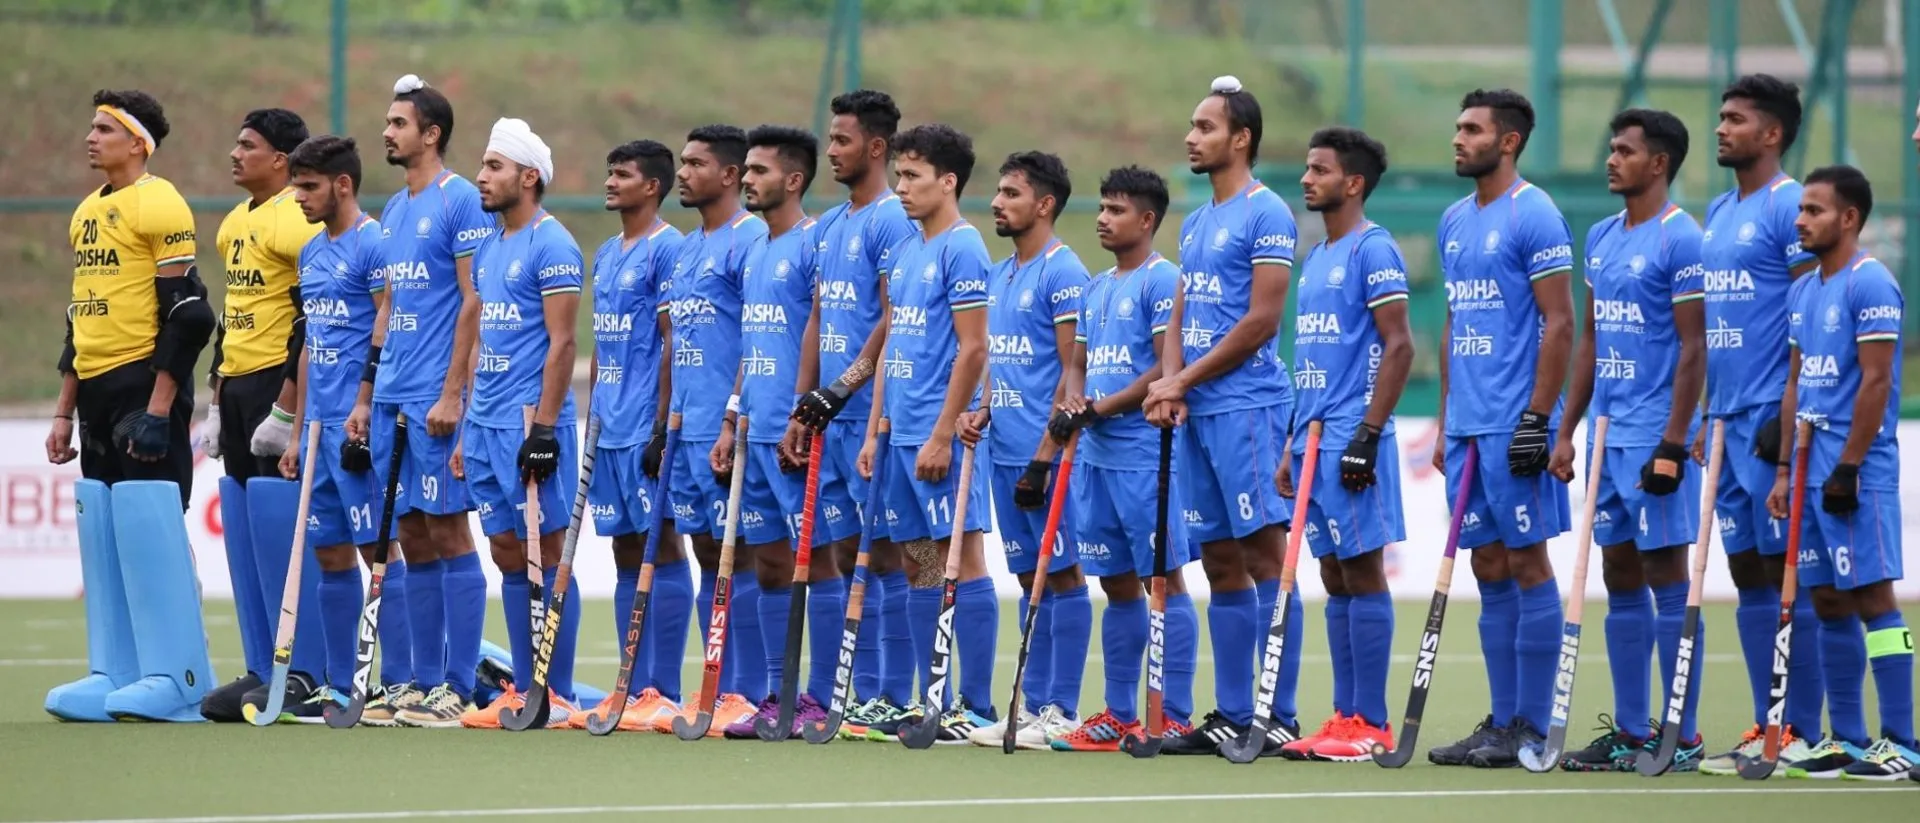 Sultan of Johor Cup | India lose 4-5 against South Africa